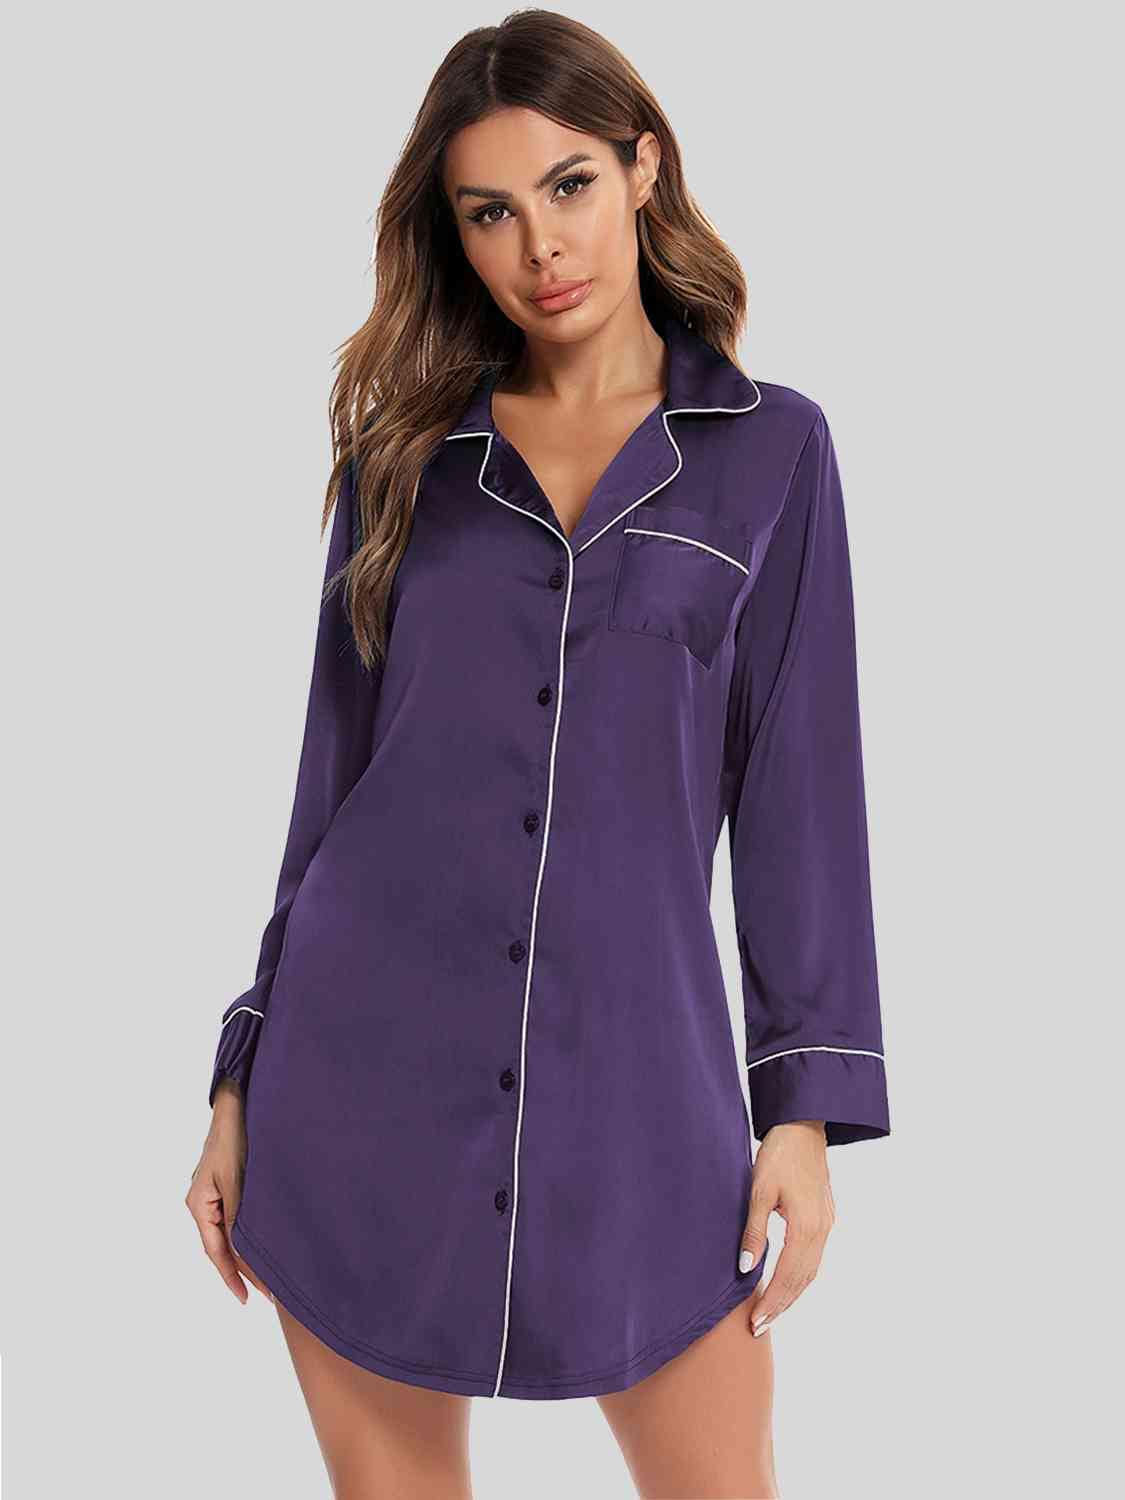 Trendsi Violet / S Button Up Lapel Collar Night Dress with Pocket 101100834678867 Apparel &amp; Accessories &gt; Clothing &gt; Sleepwear &amp; Loungewear &gt; Robes